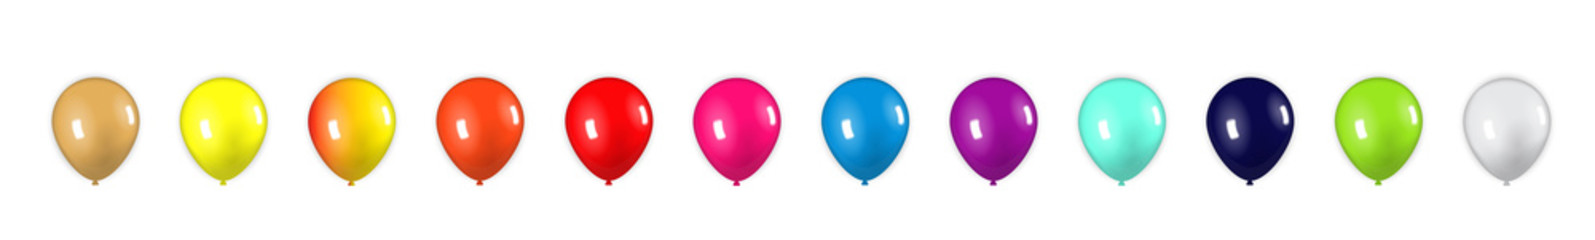 colored set of blue balloons isolated on white background, vector illustration